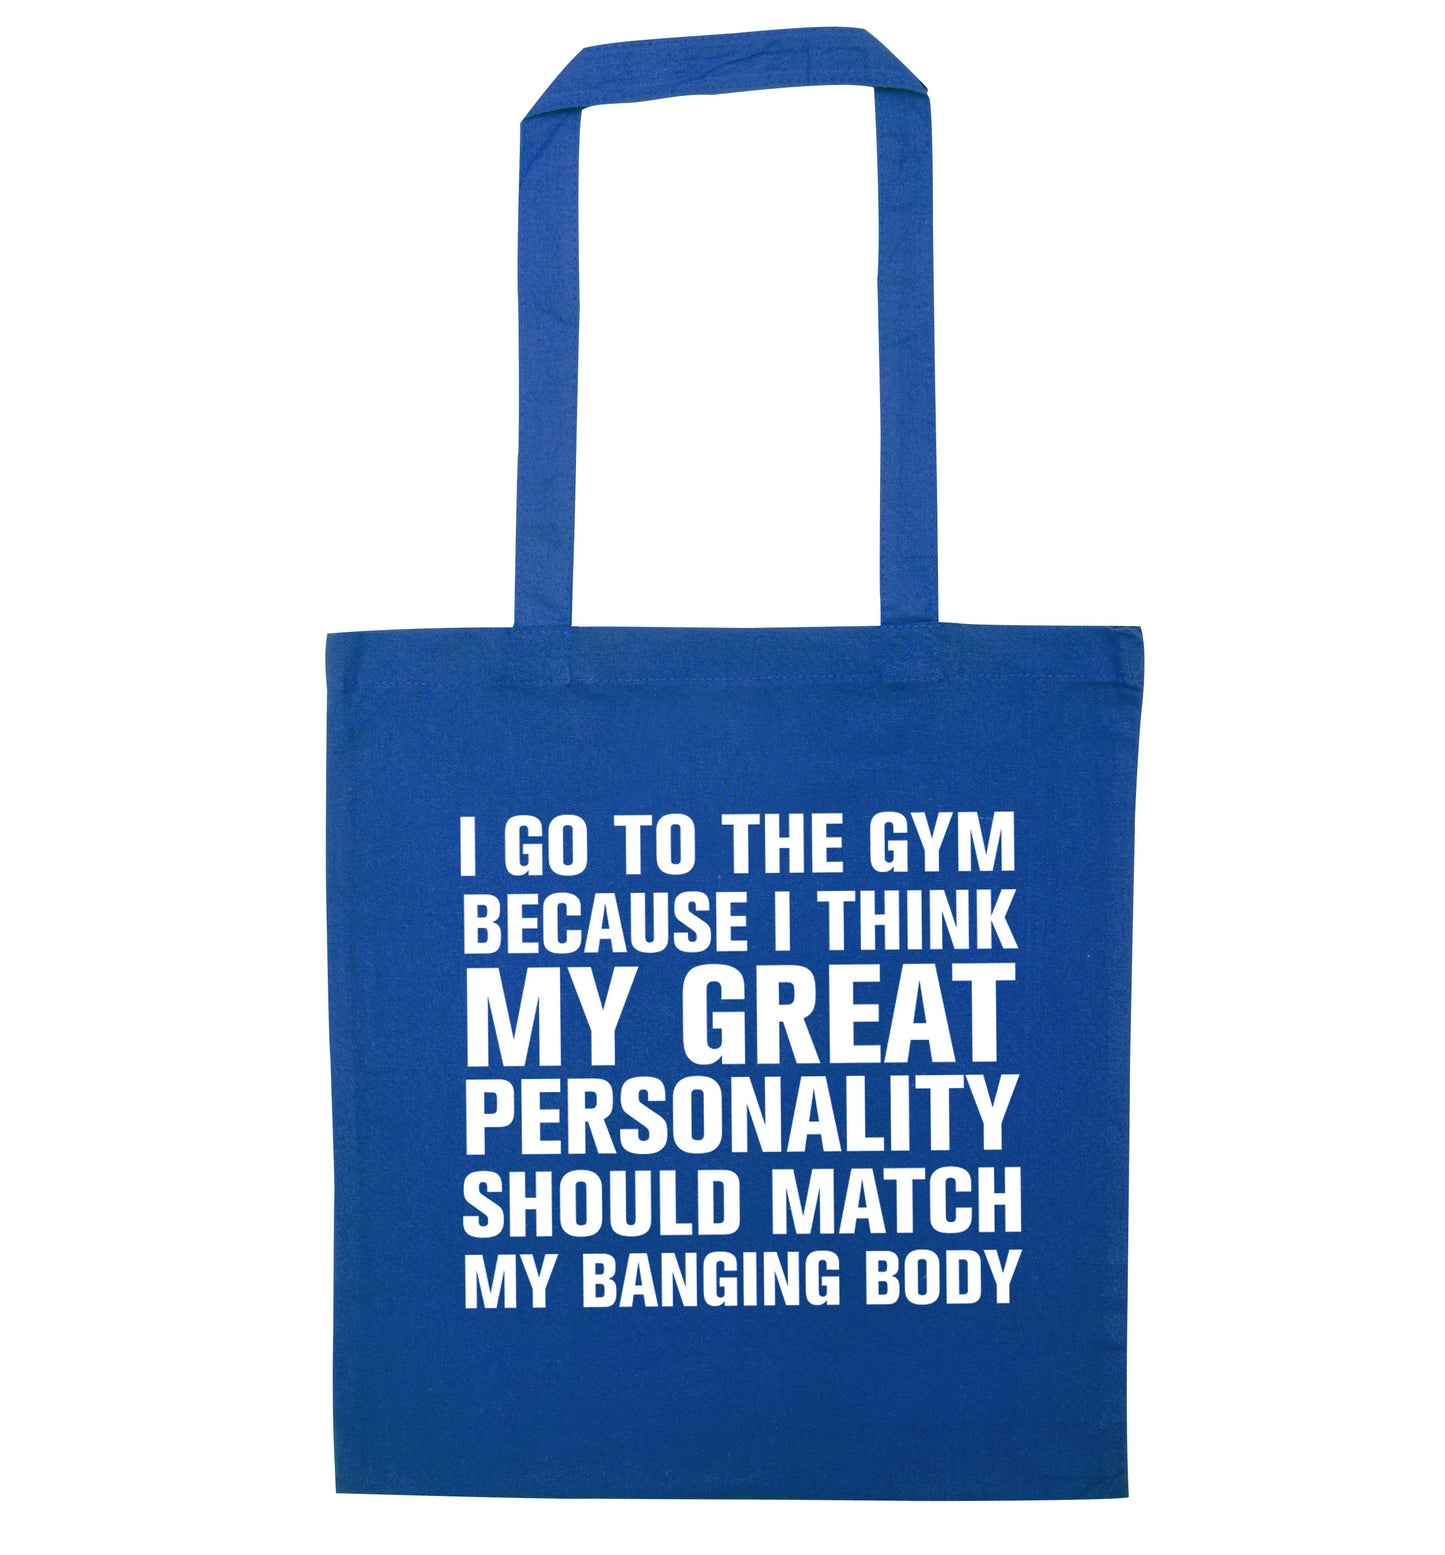 I go to the gym because I think my great personality should match my banging body blue tote bag